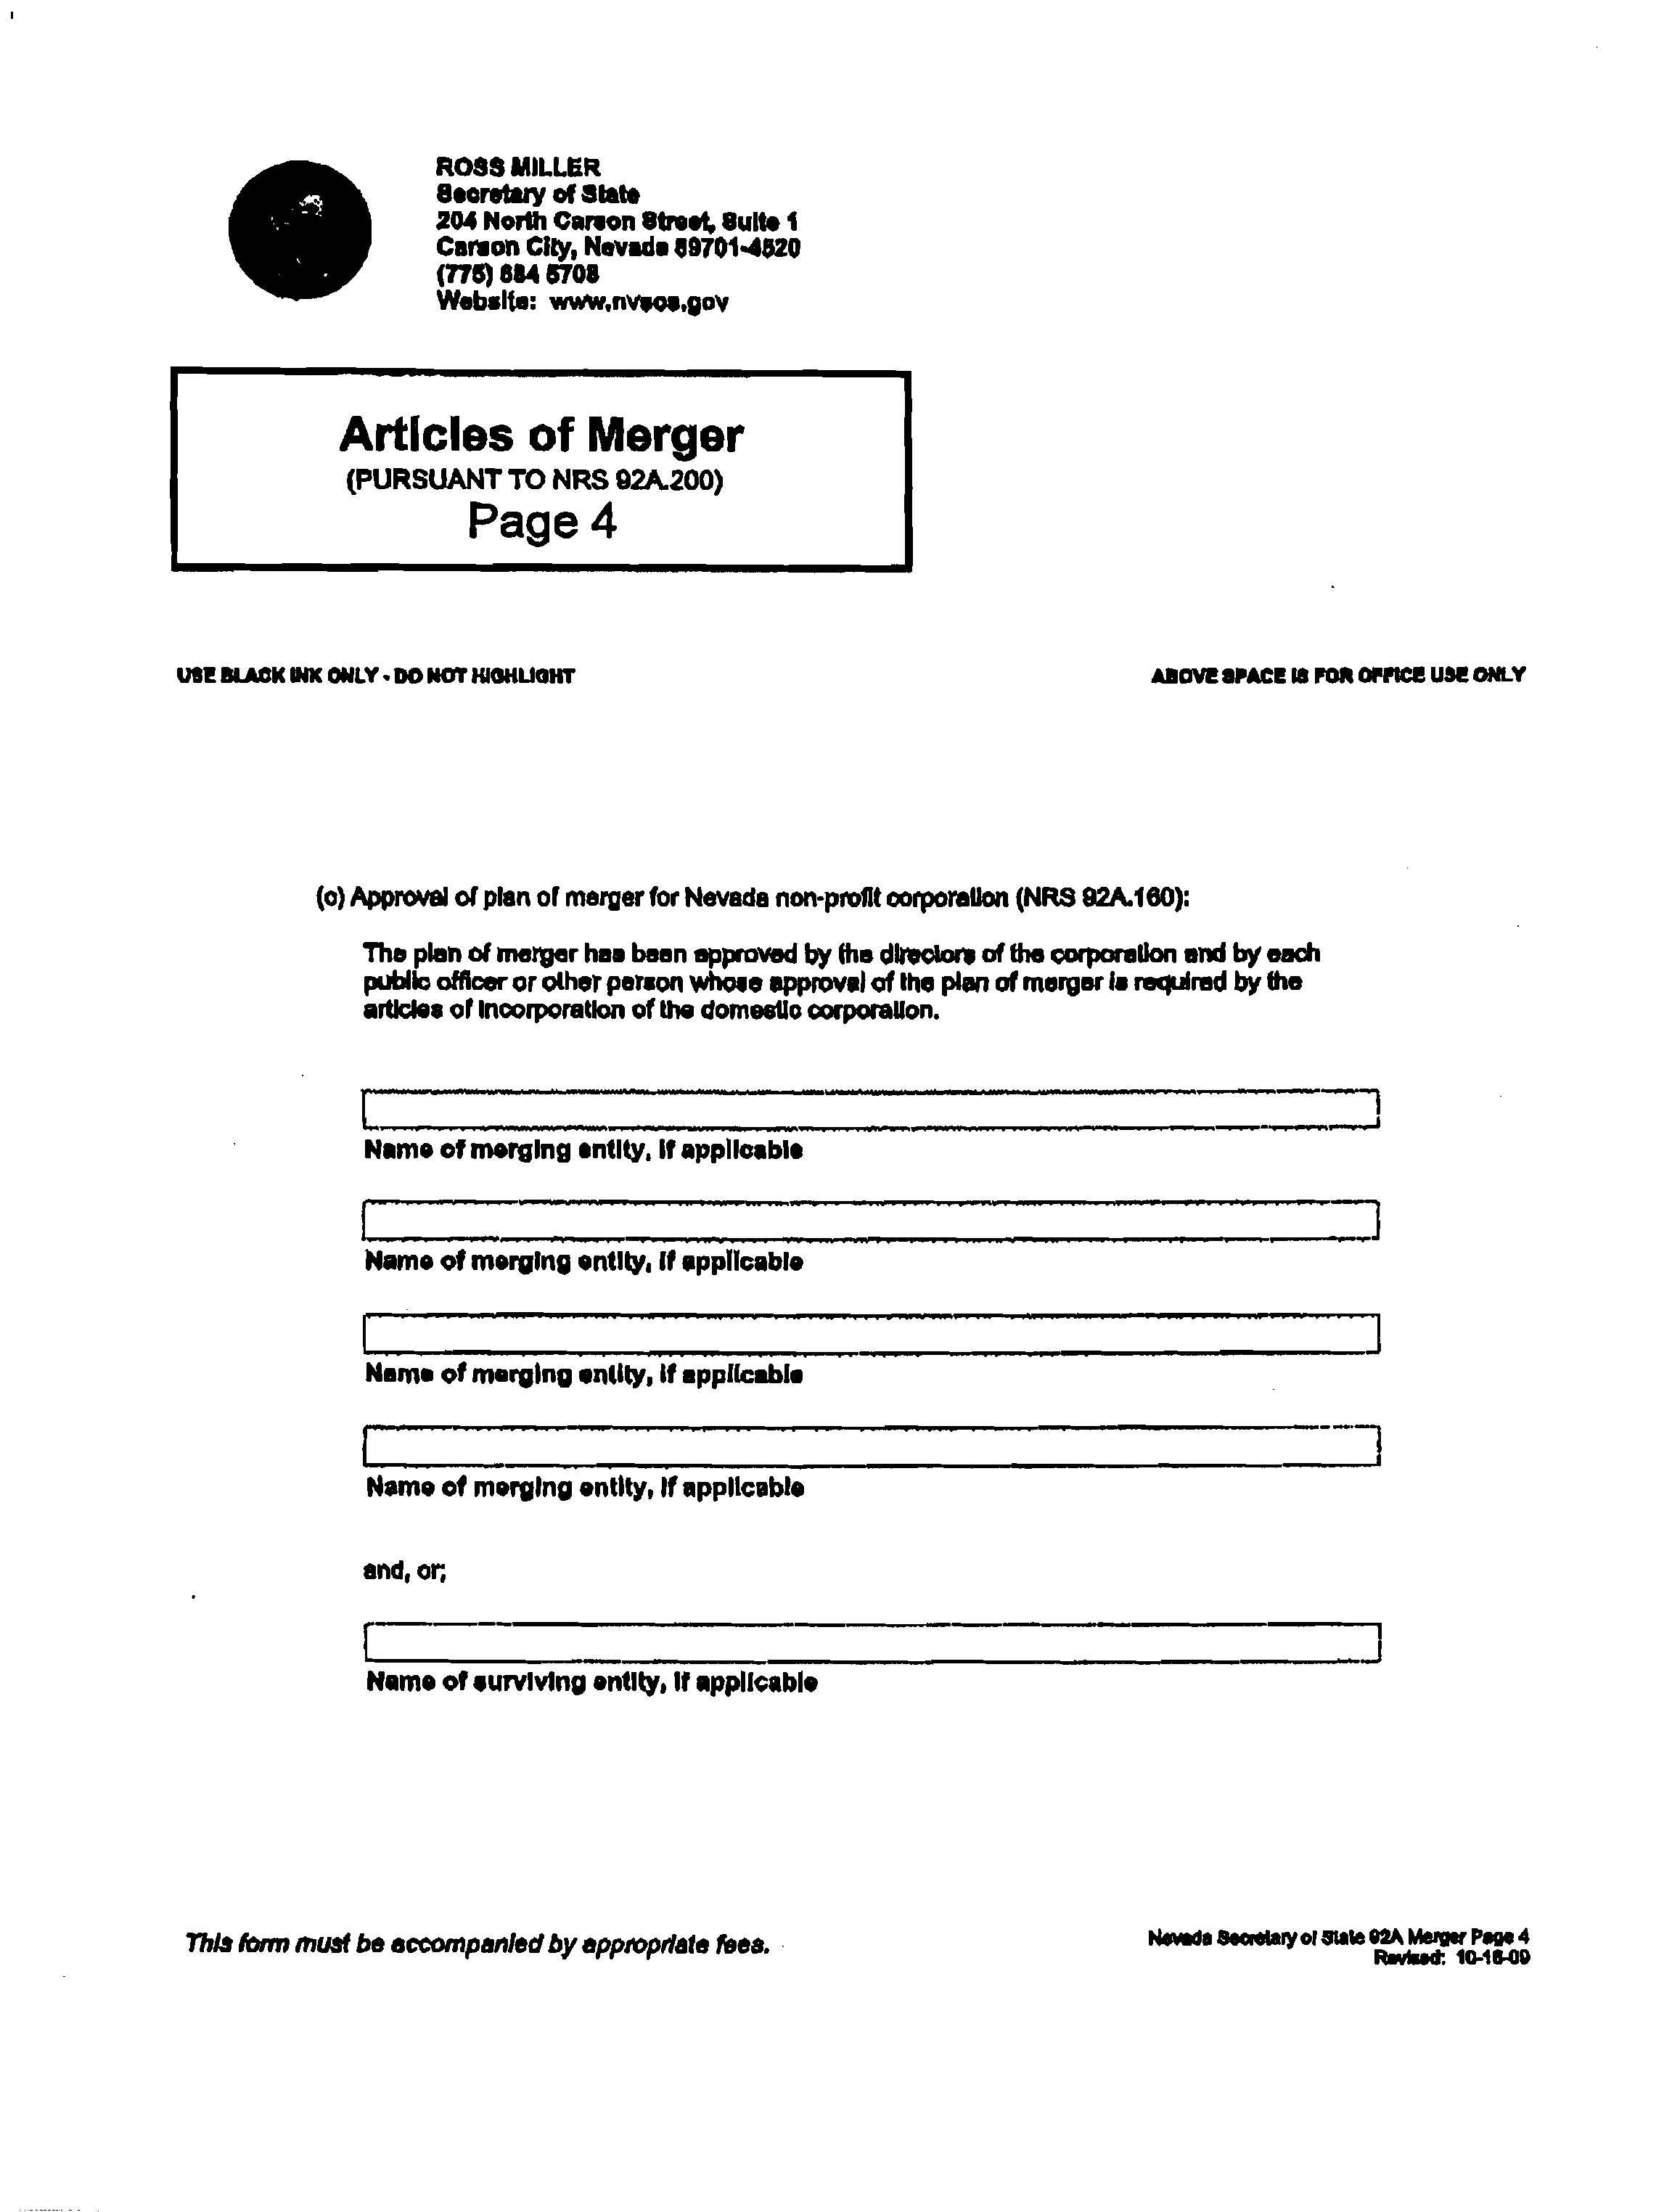 Articles of Merger - Page 4.